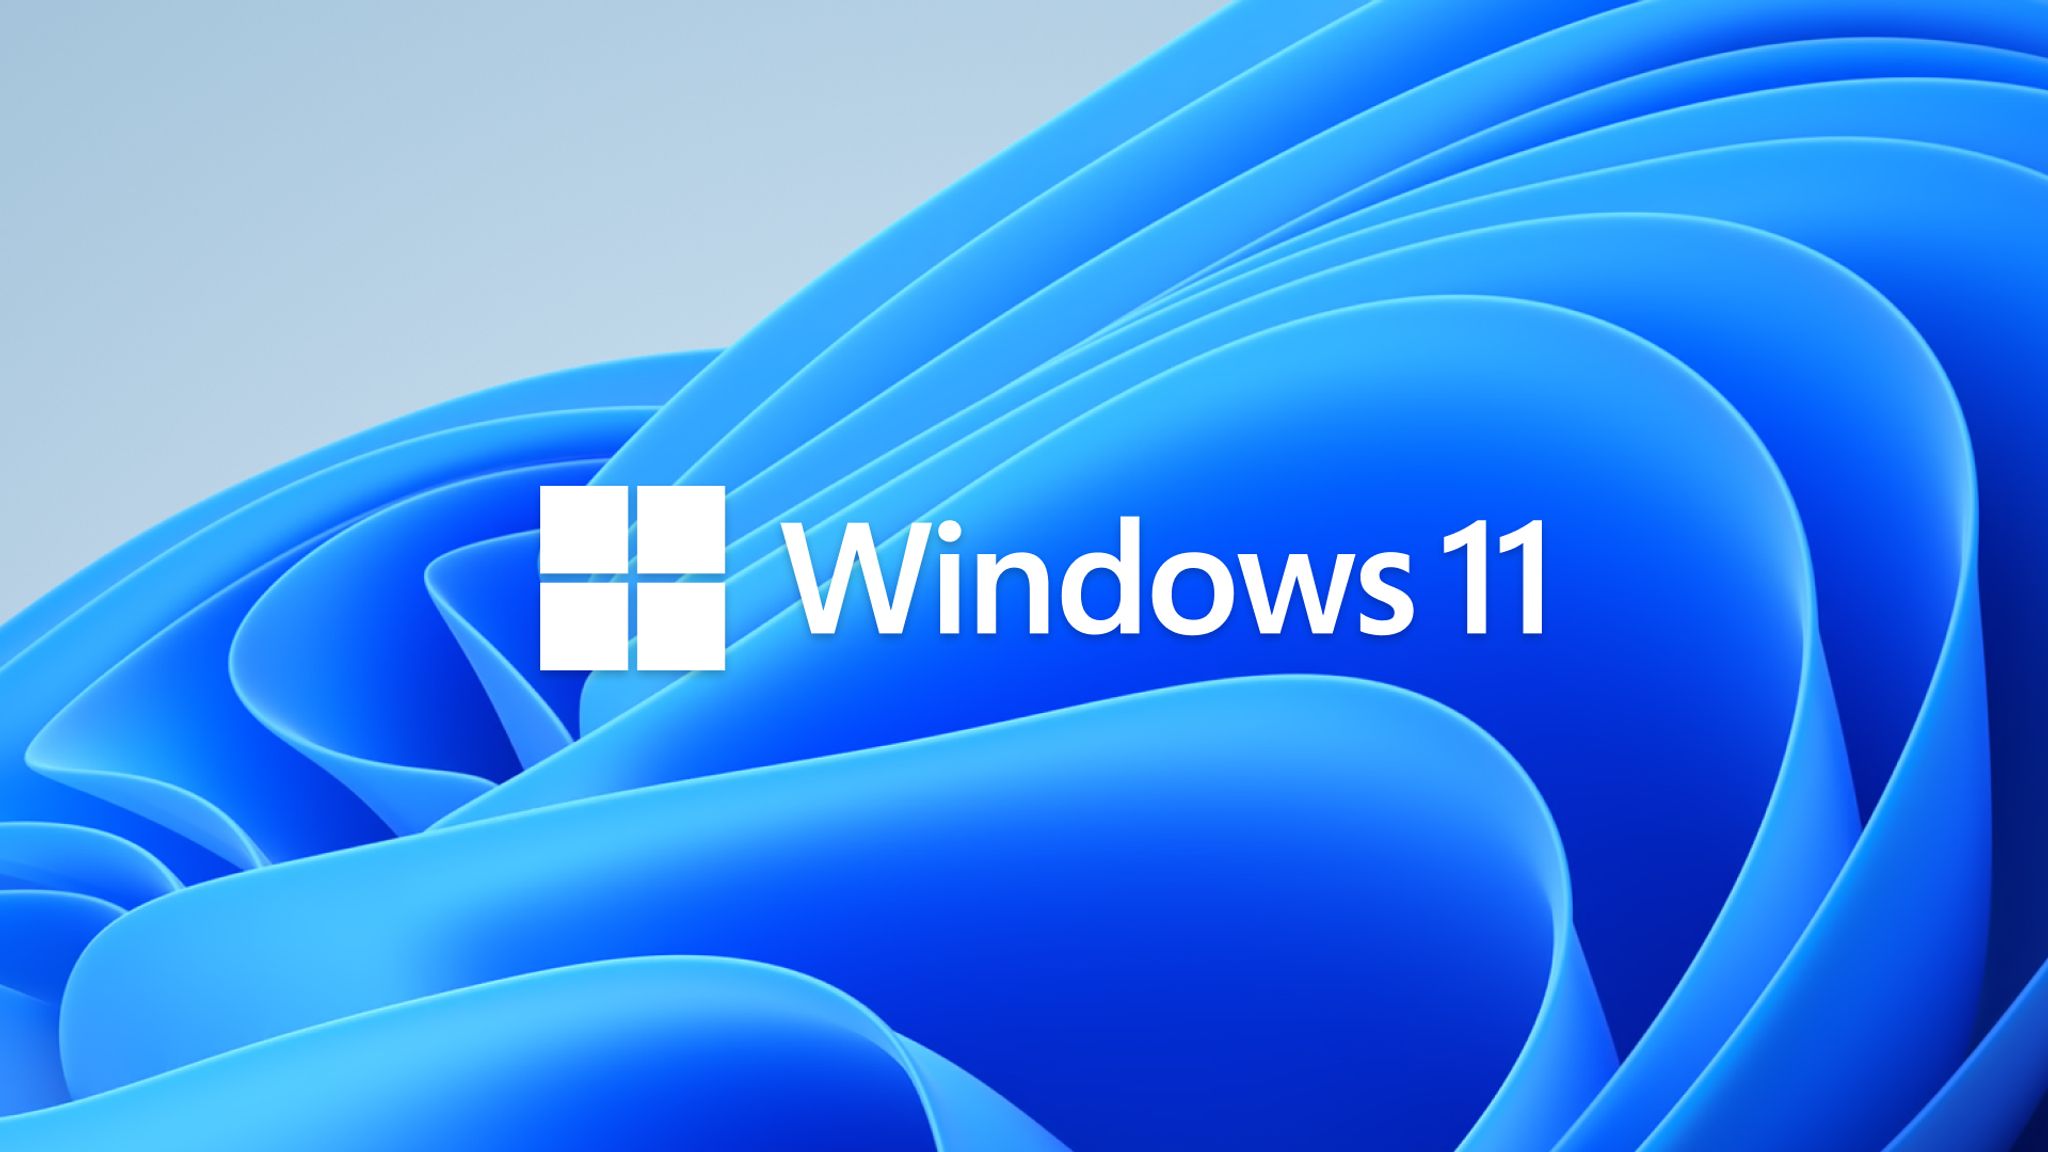 It is necessary to have a premium version of windows 11 called windows 11 pro